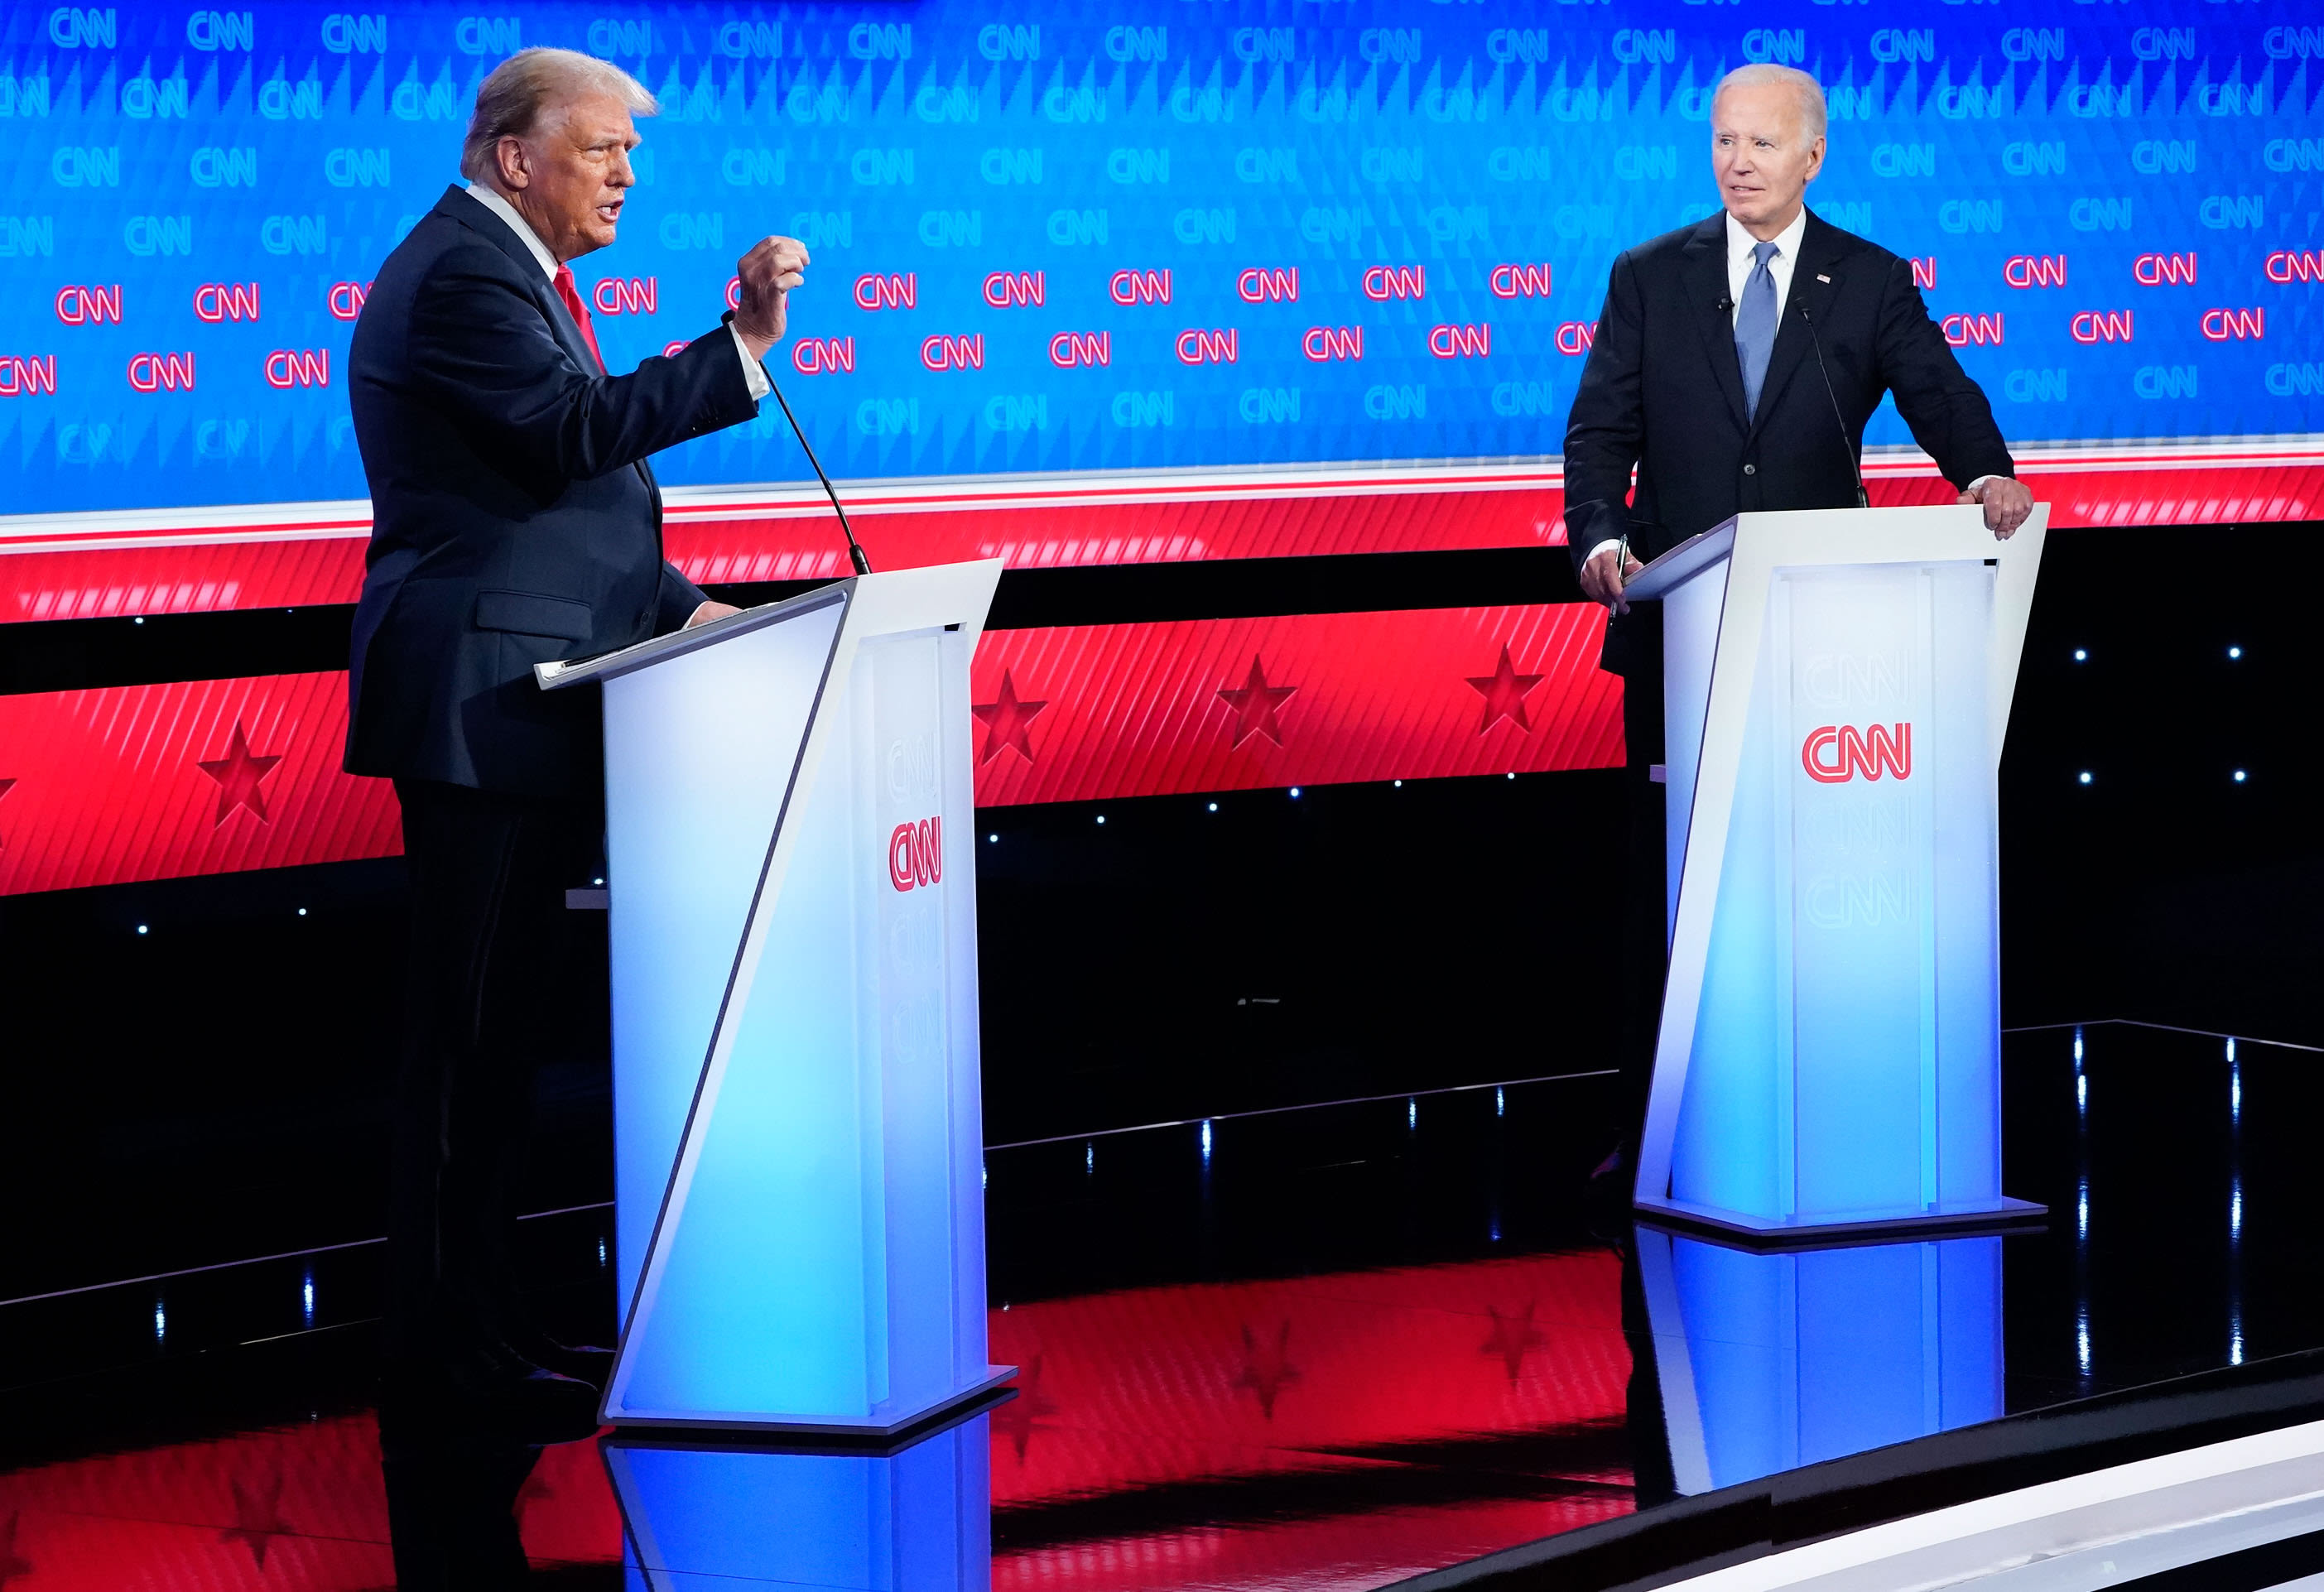 Donations to Trump and Biden spiked after debate, new reports show